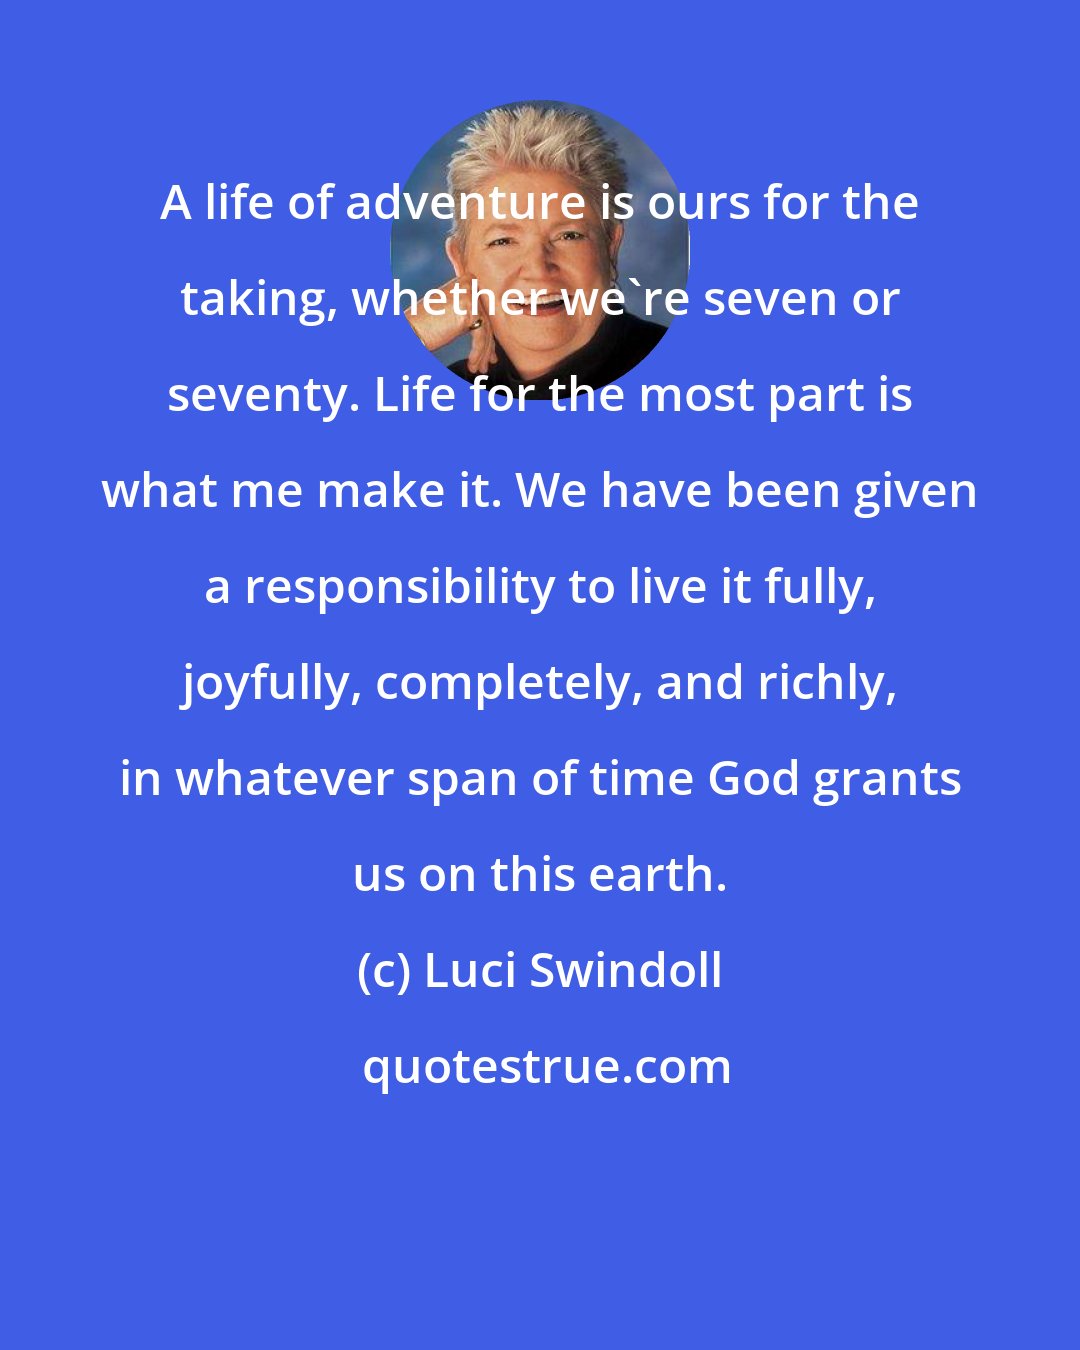 Luci Swindoll: A life of adventure is ours for the taking, whether we're seven or seventy. Life for the most part is what me make it. We have been given a responsibility to live it fully, joyfully, completely, and richly, in whatever span of time God grants us on this earth.